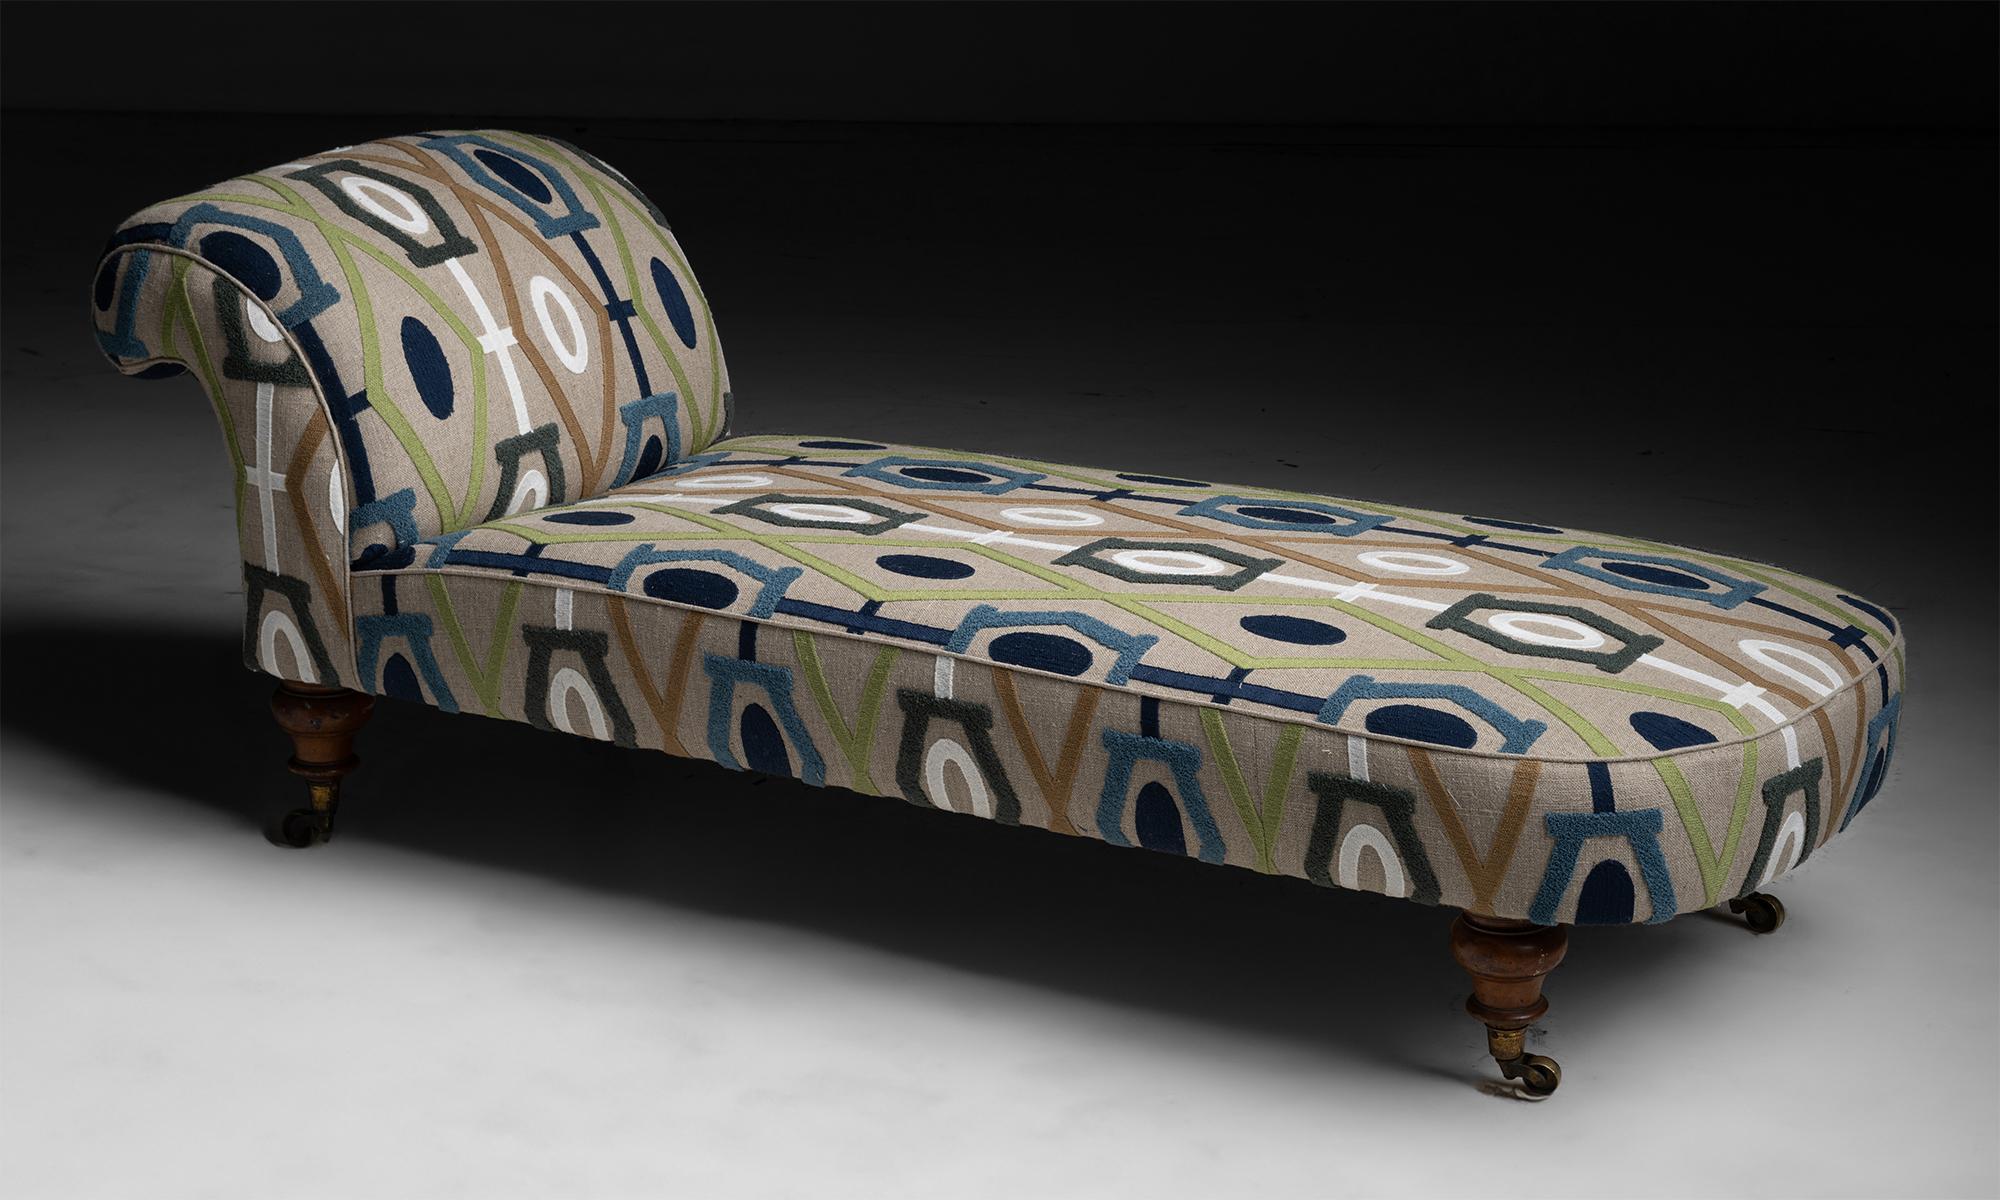 Daybed in Embroidered Linen by Pierre Frey

England circa 1900

Newly upholstered in embroidered linen by Pierre Frey.

27